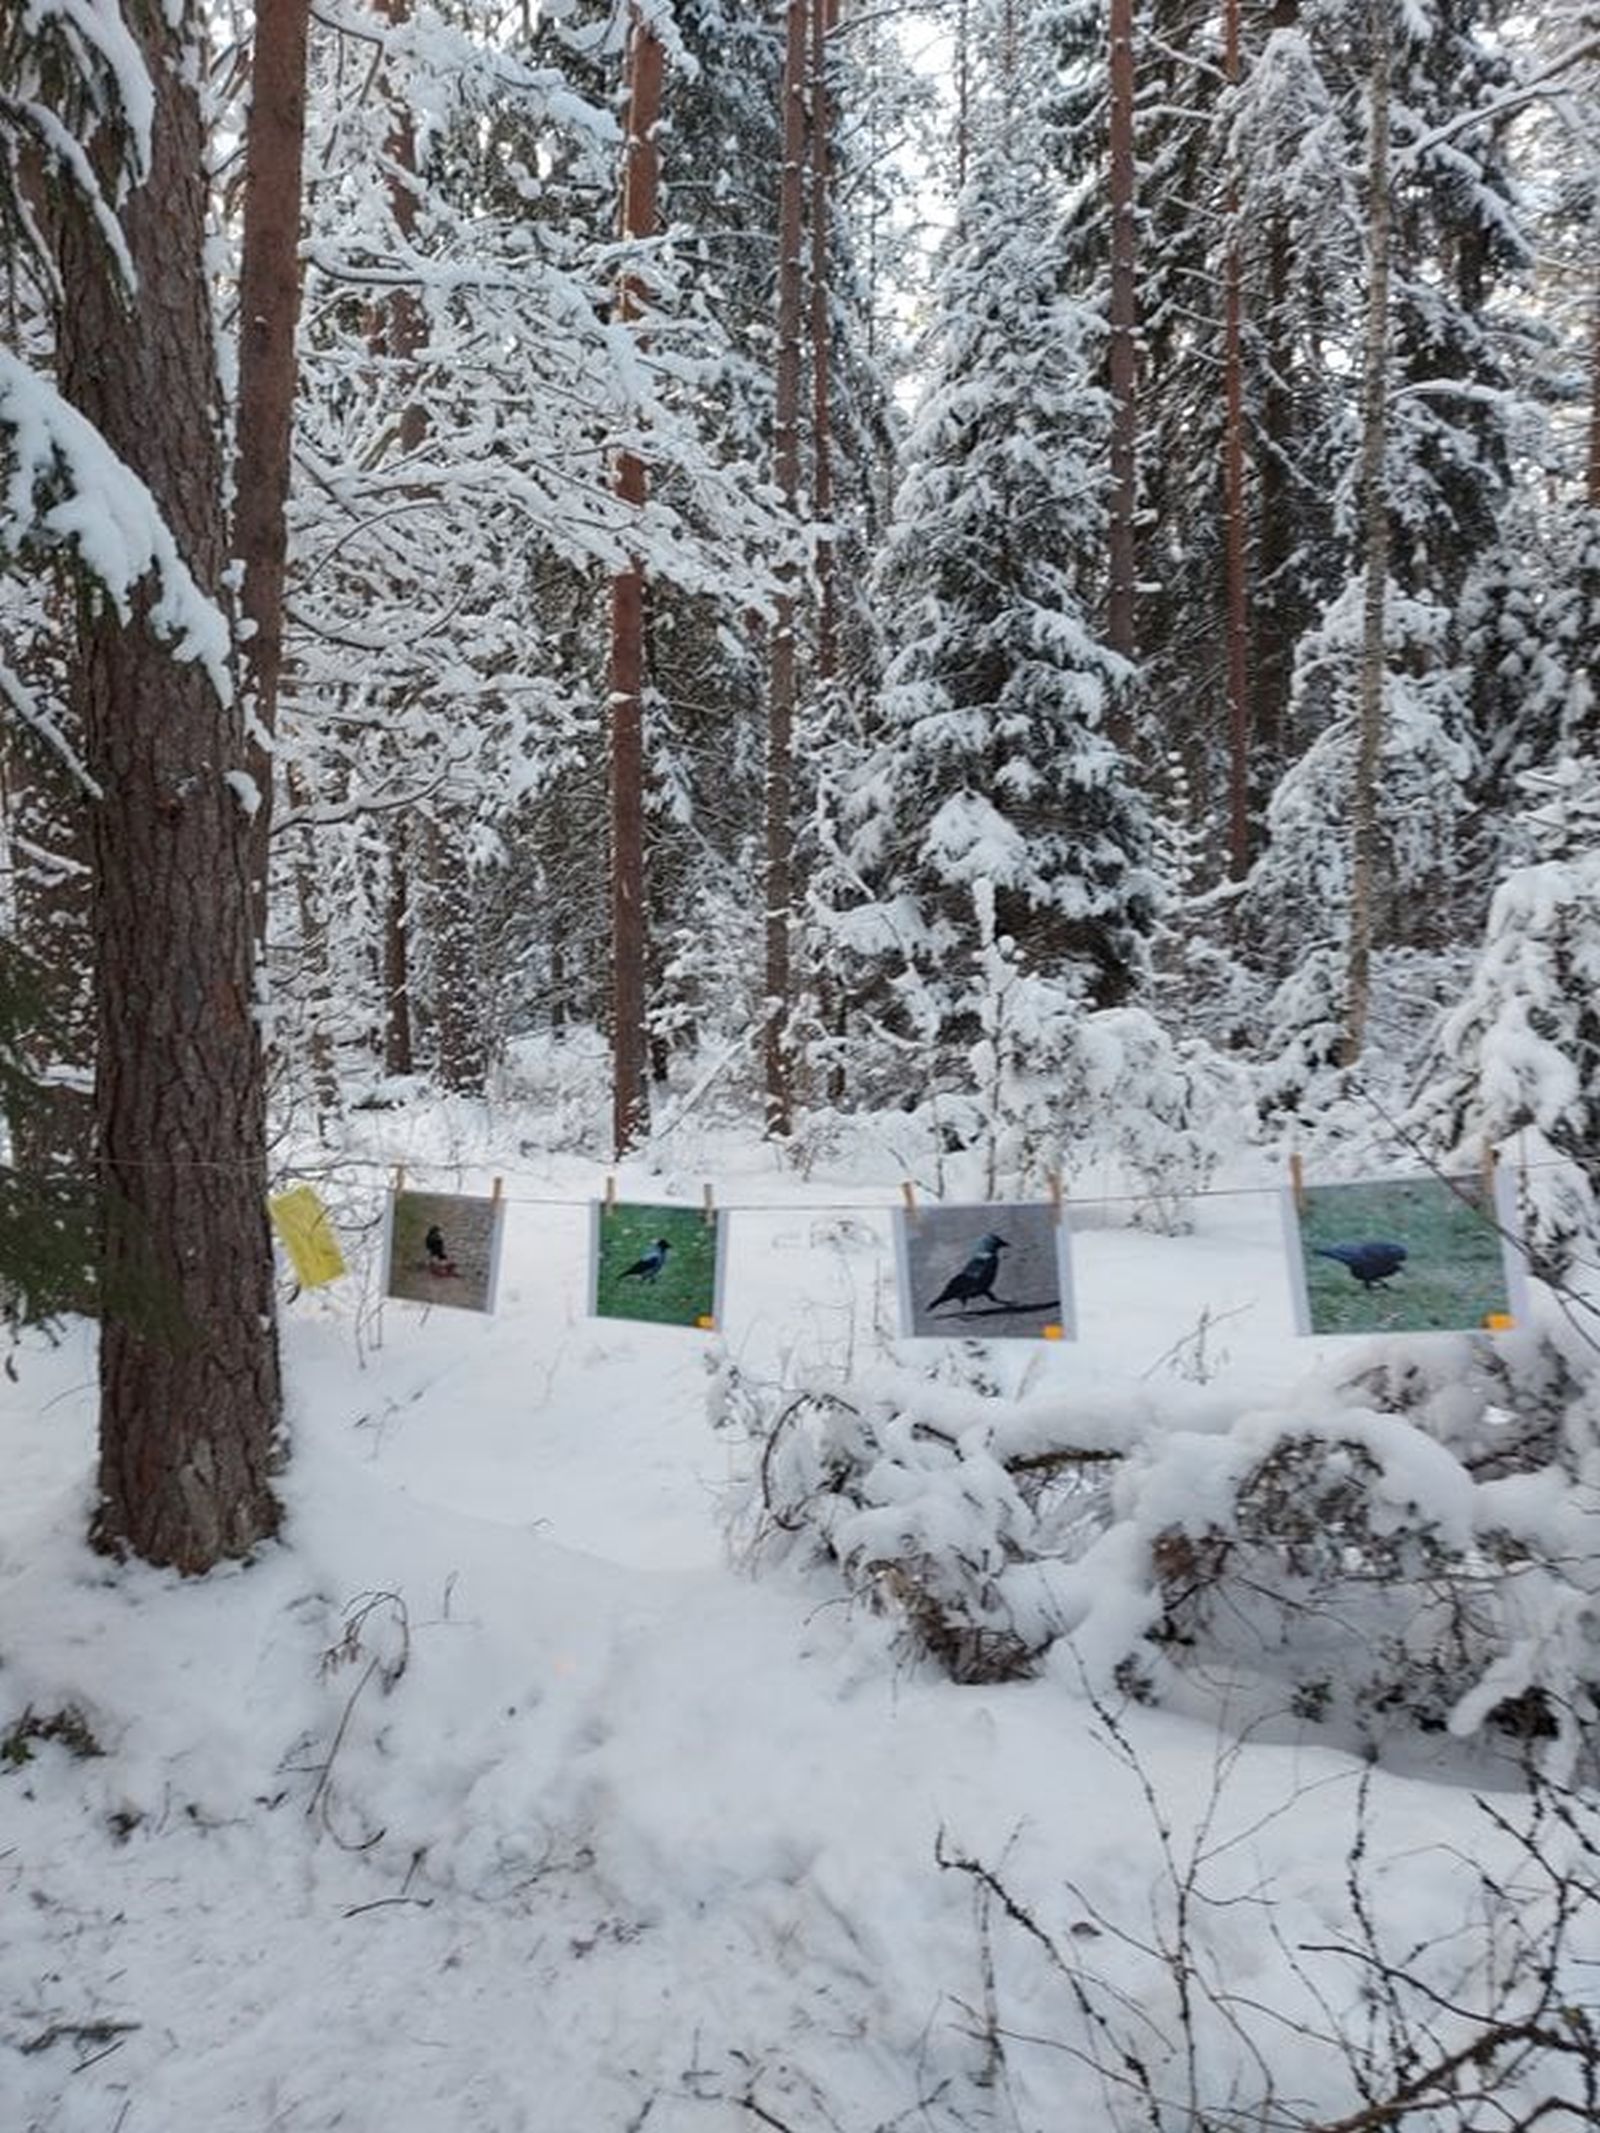 Vapramäe nature study and hiking trails in winter